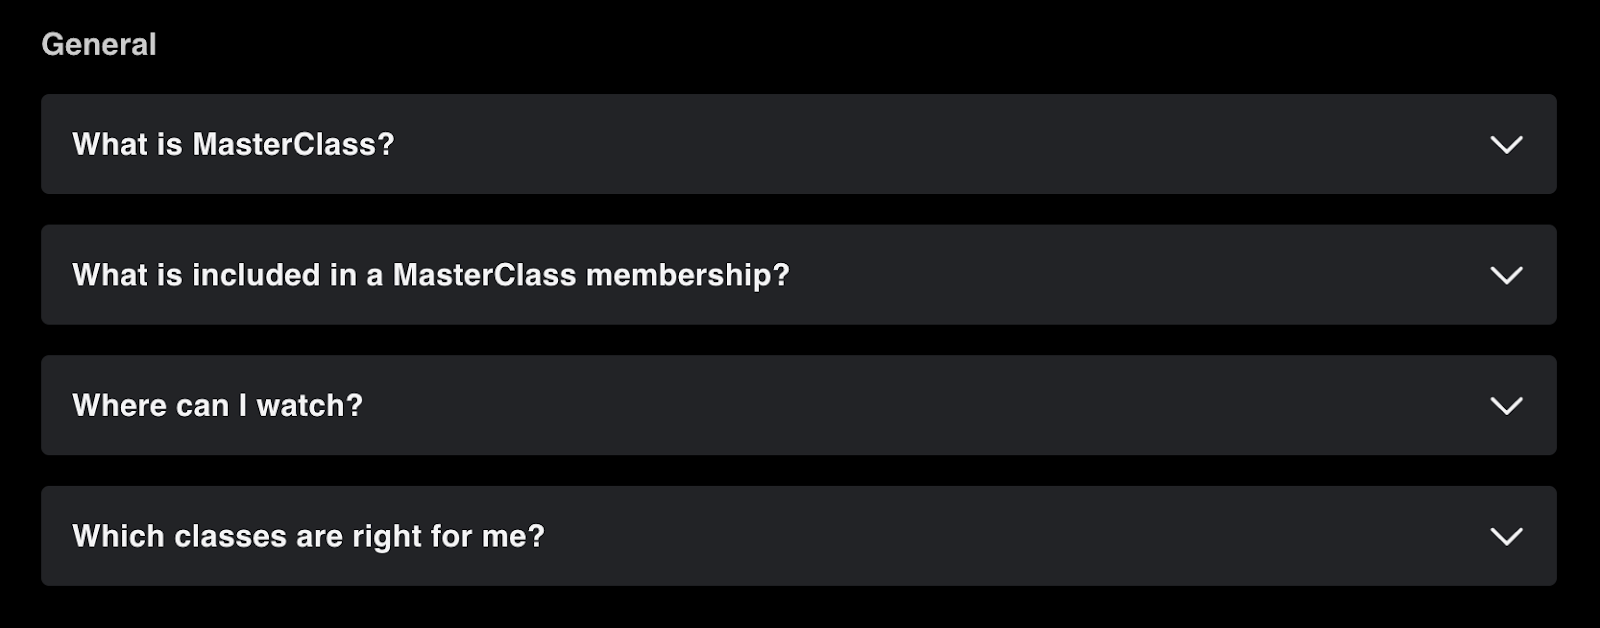 Masterclass FAQs such as: what's included in membership, where can I watch and which classes are right for me?